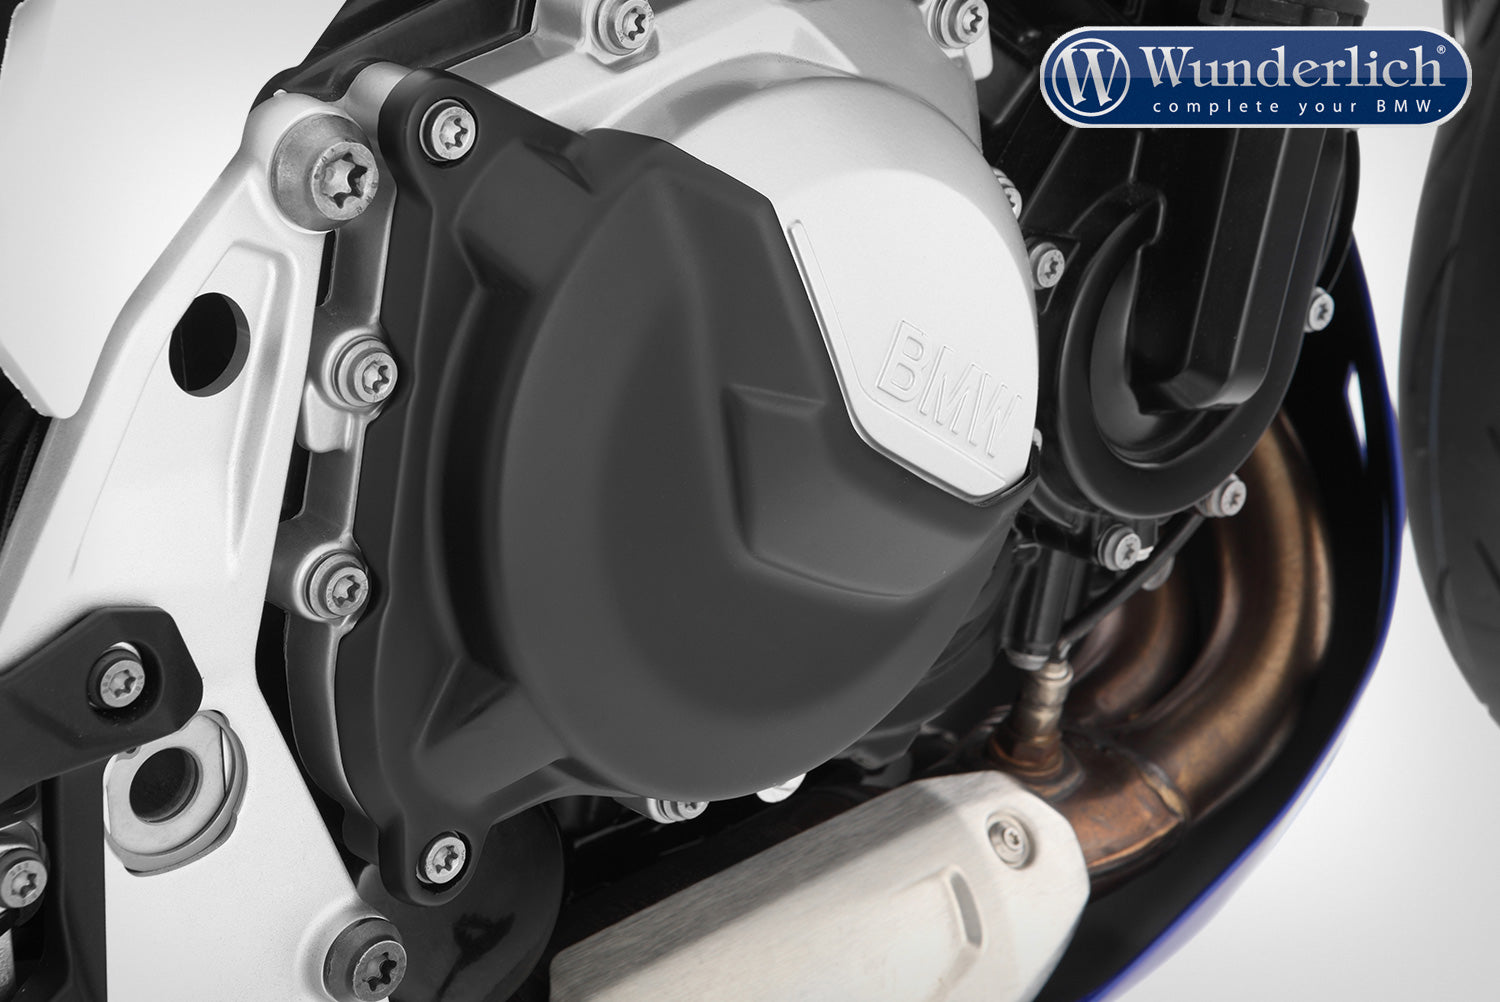 Wunderlich protective cover set for clutch and alternator cover - black F750 GS/ F850 GS